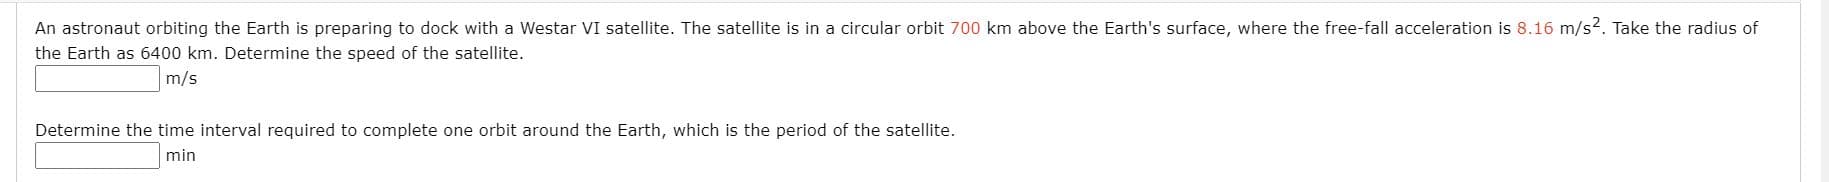 An astronaut orbiting the Earth is preparing to dock with a Westar VI satellite. The satellite is in a circular orbit 700 km above the Earth's surface, where the free-fall acceleration is 8.16 m/s2. Take the radius of
the Earth as 6400 km. Determine the speed of the satellite.
m/s
Determine the time interval required to complete one orbit around the Earth, which is the period of the satellite.
min
